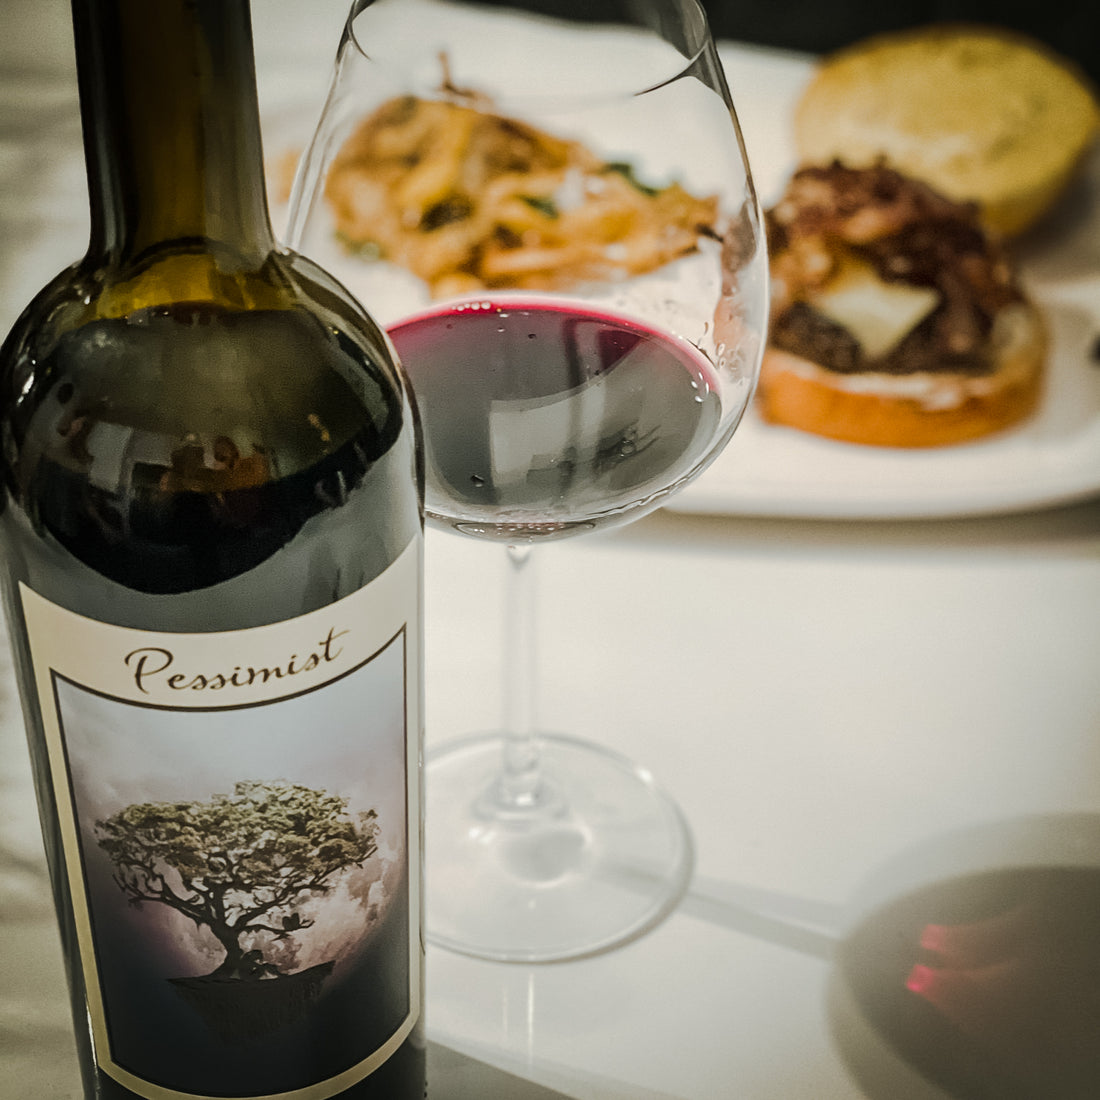 Pessimist Red Blend Wine and Wagyu Burger